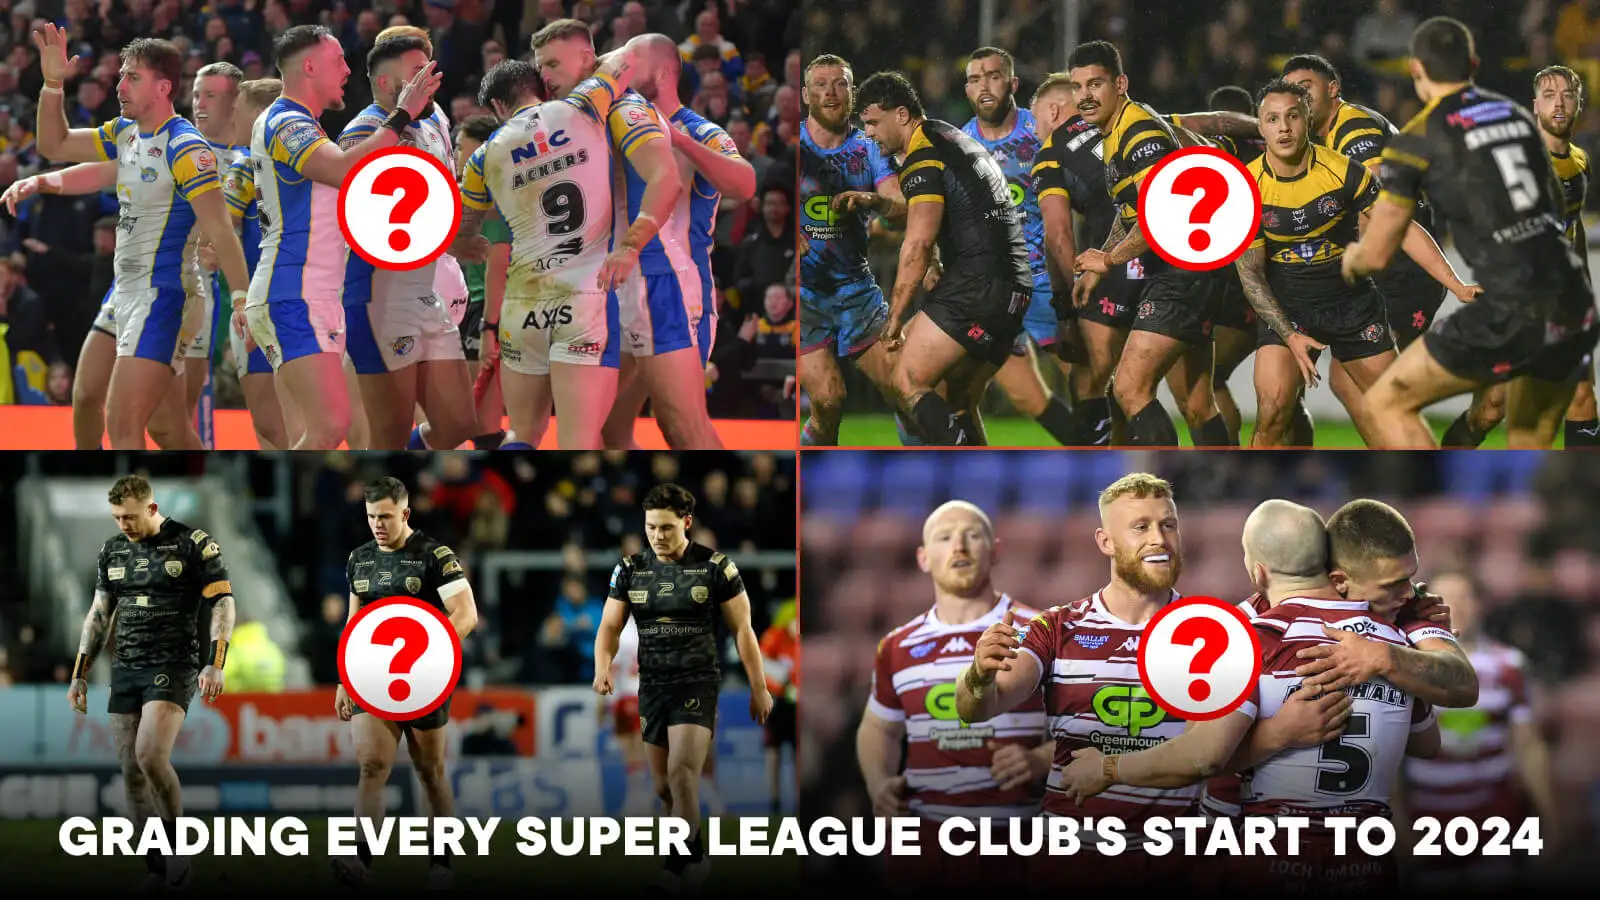 Leeds Rhinos, Castleford Tigers, Leigh Leopards, Wigan Warriors (question marks over each club's picture) with text on bottom: 'GRADING EVERY SUPER LEAGUE CLUB'S START TO 2024'